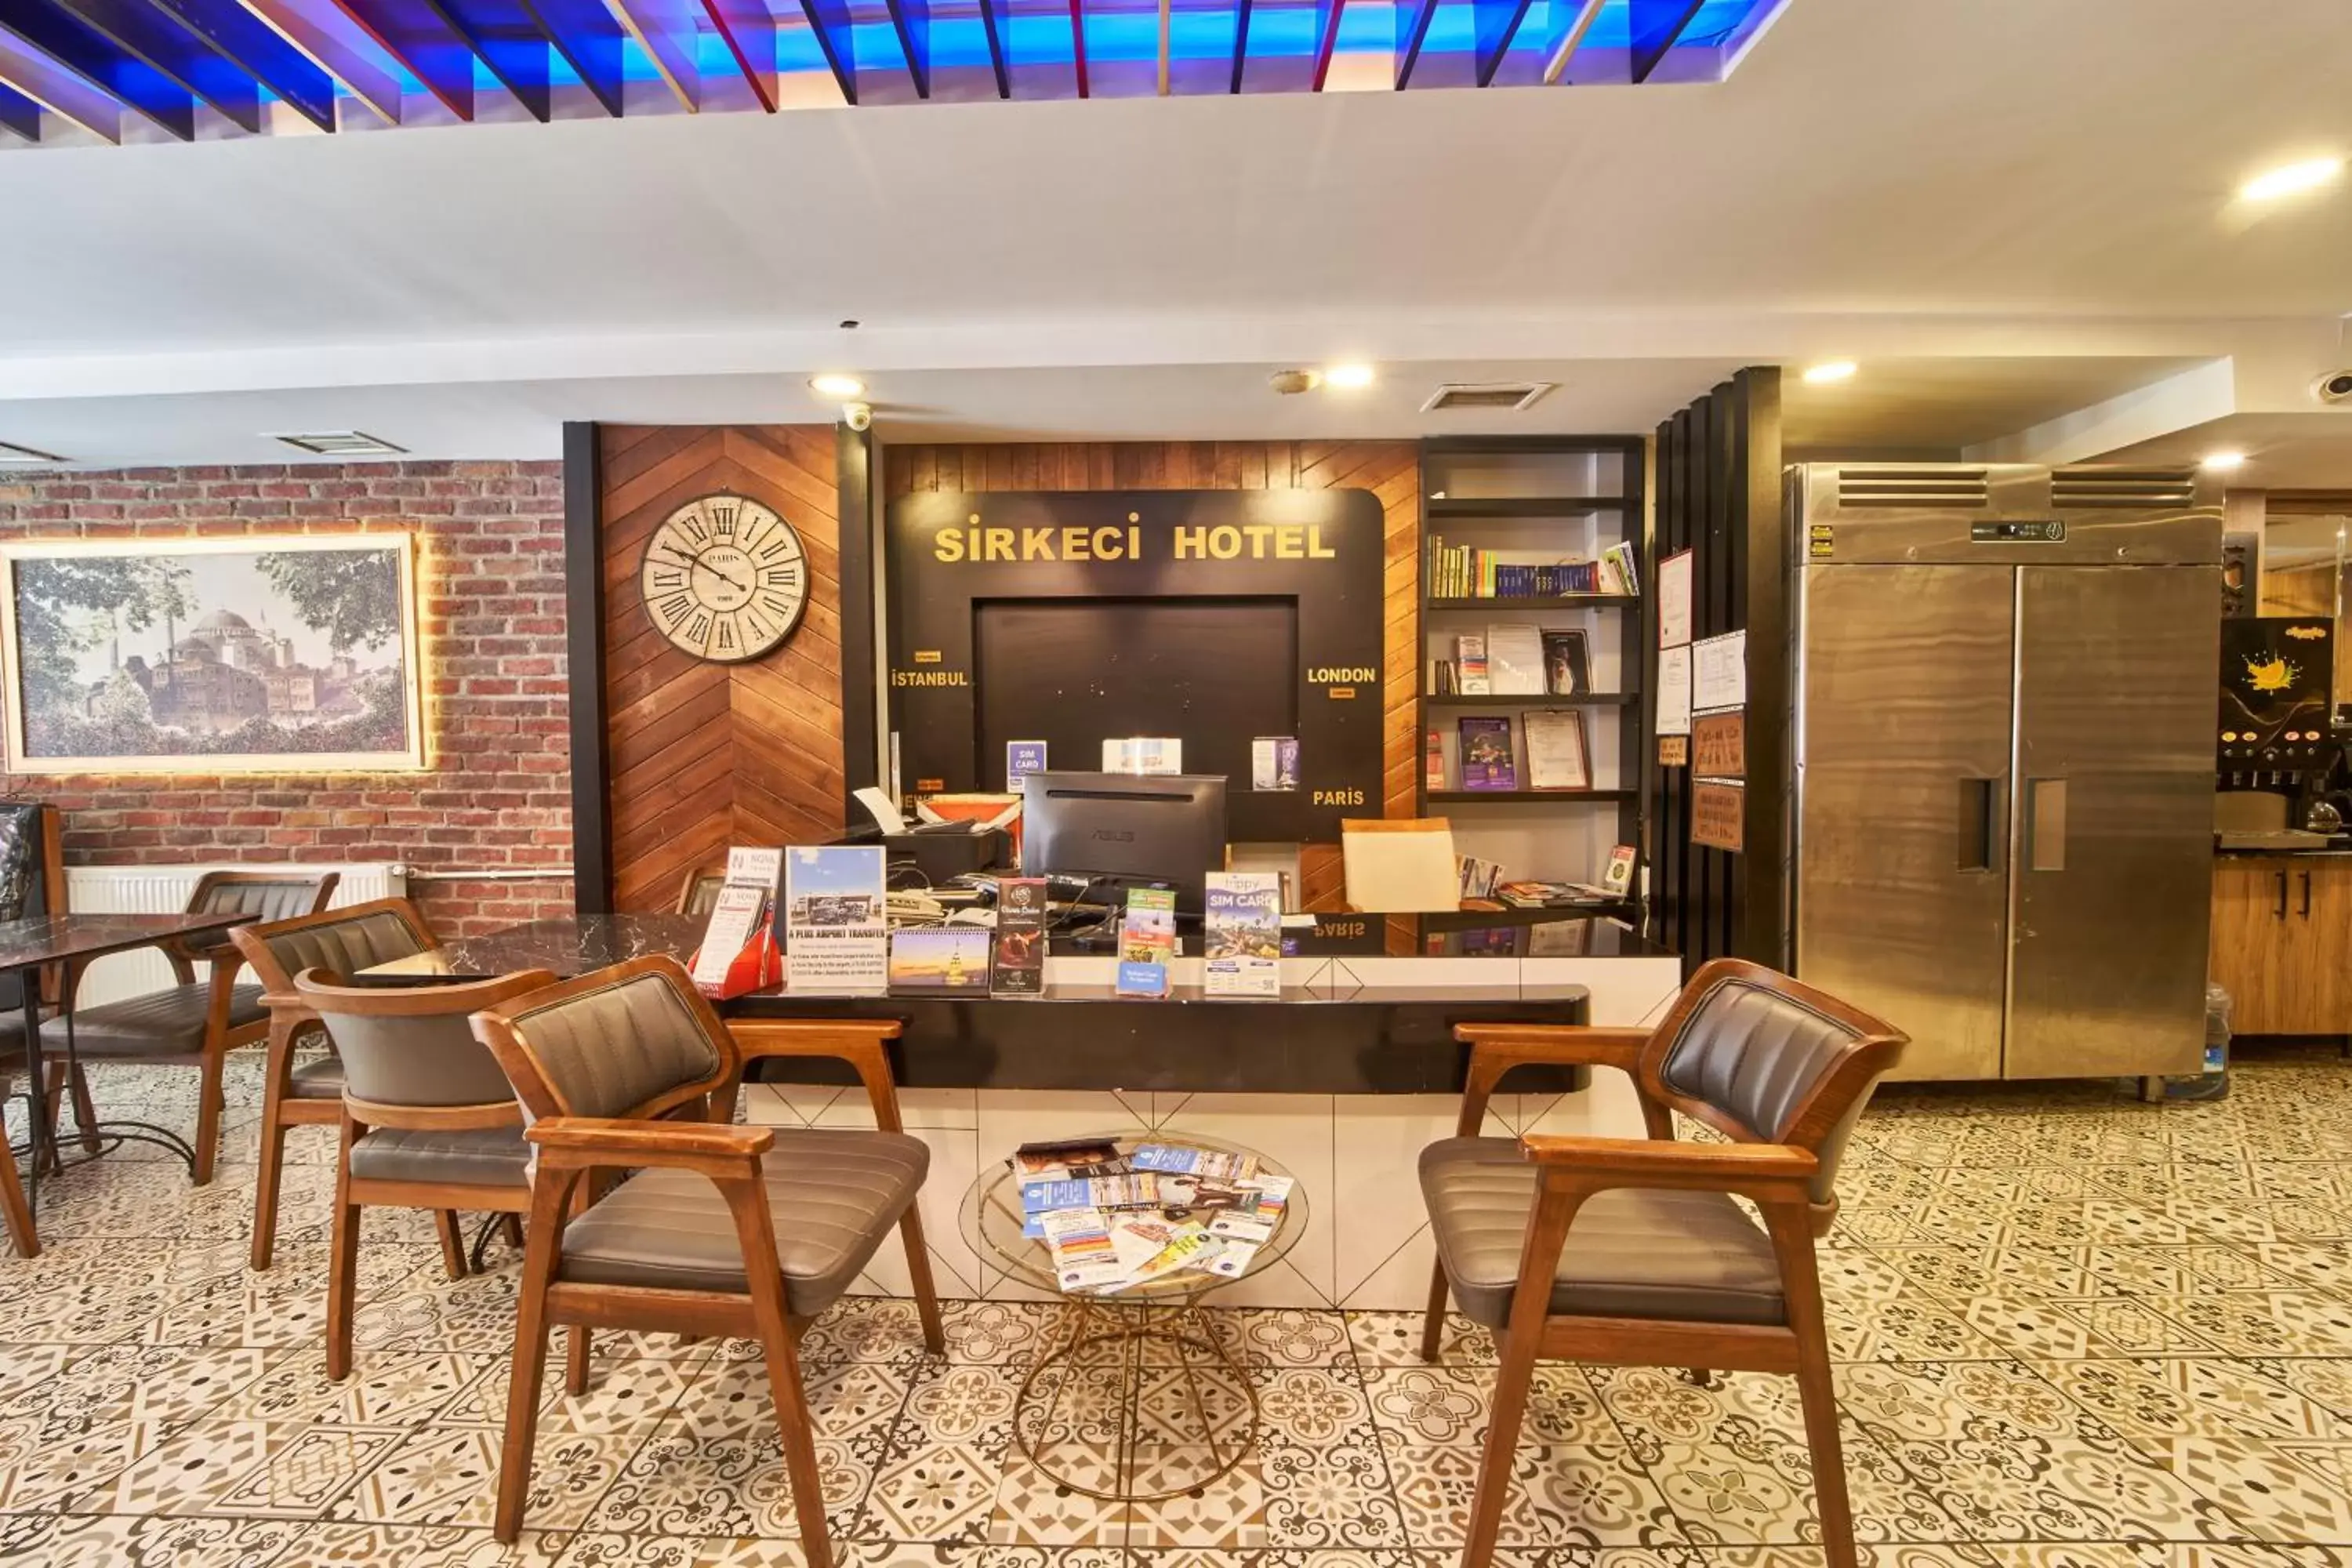 Property building in Istanbul Sirkeci Hotel